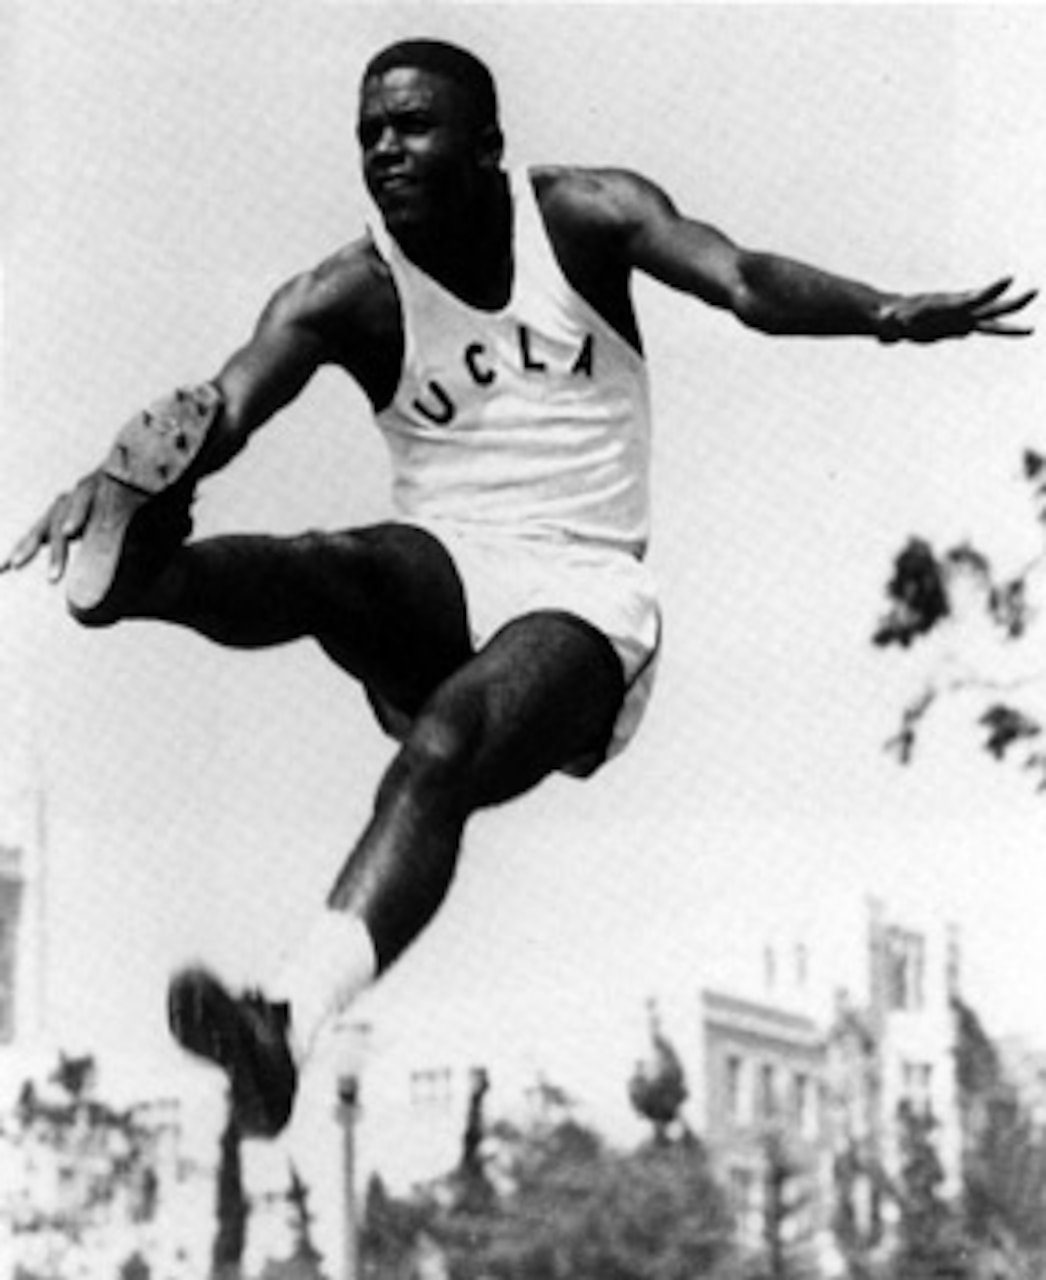 An athlete jumps high into the air.